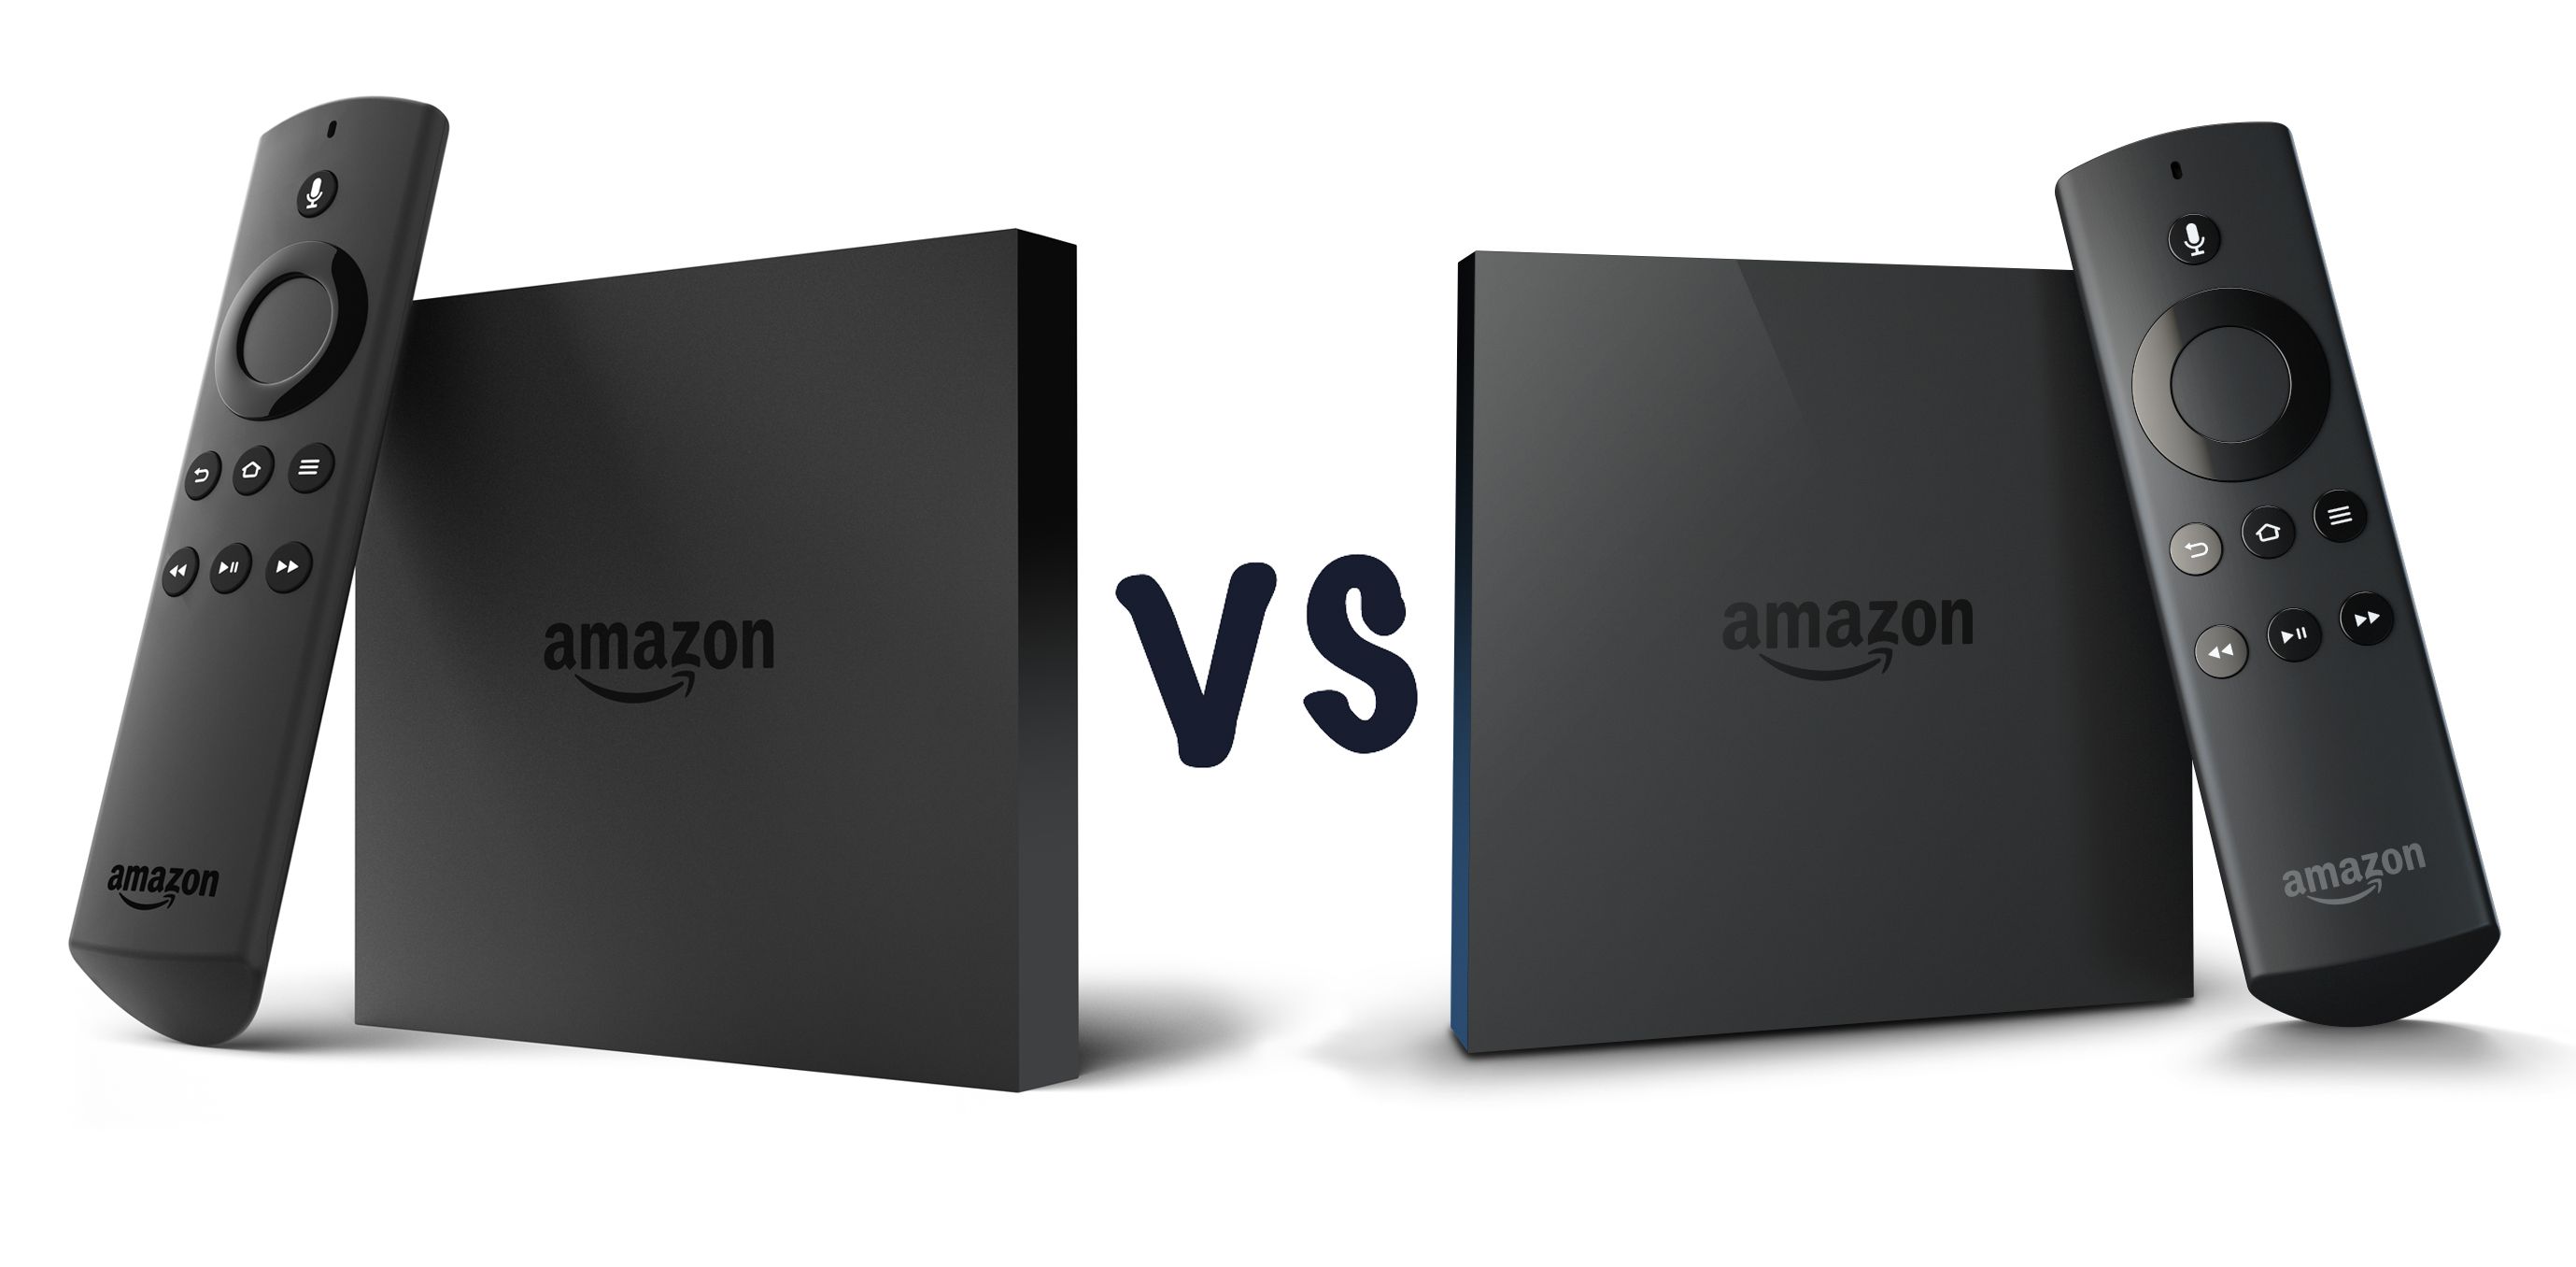 amazon fire tv with 4k vs amazon fire tv is it worth upgrading  image 1